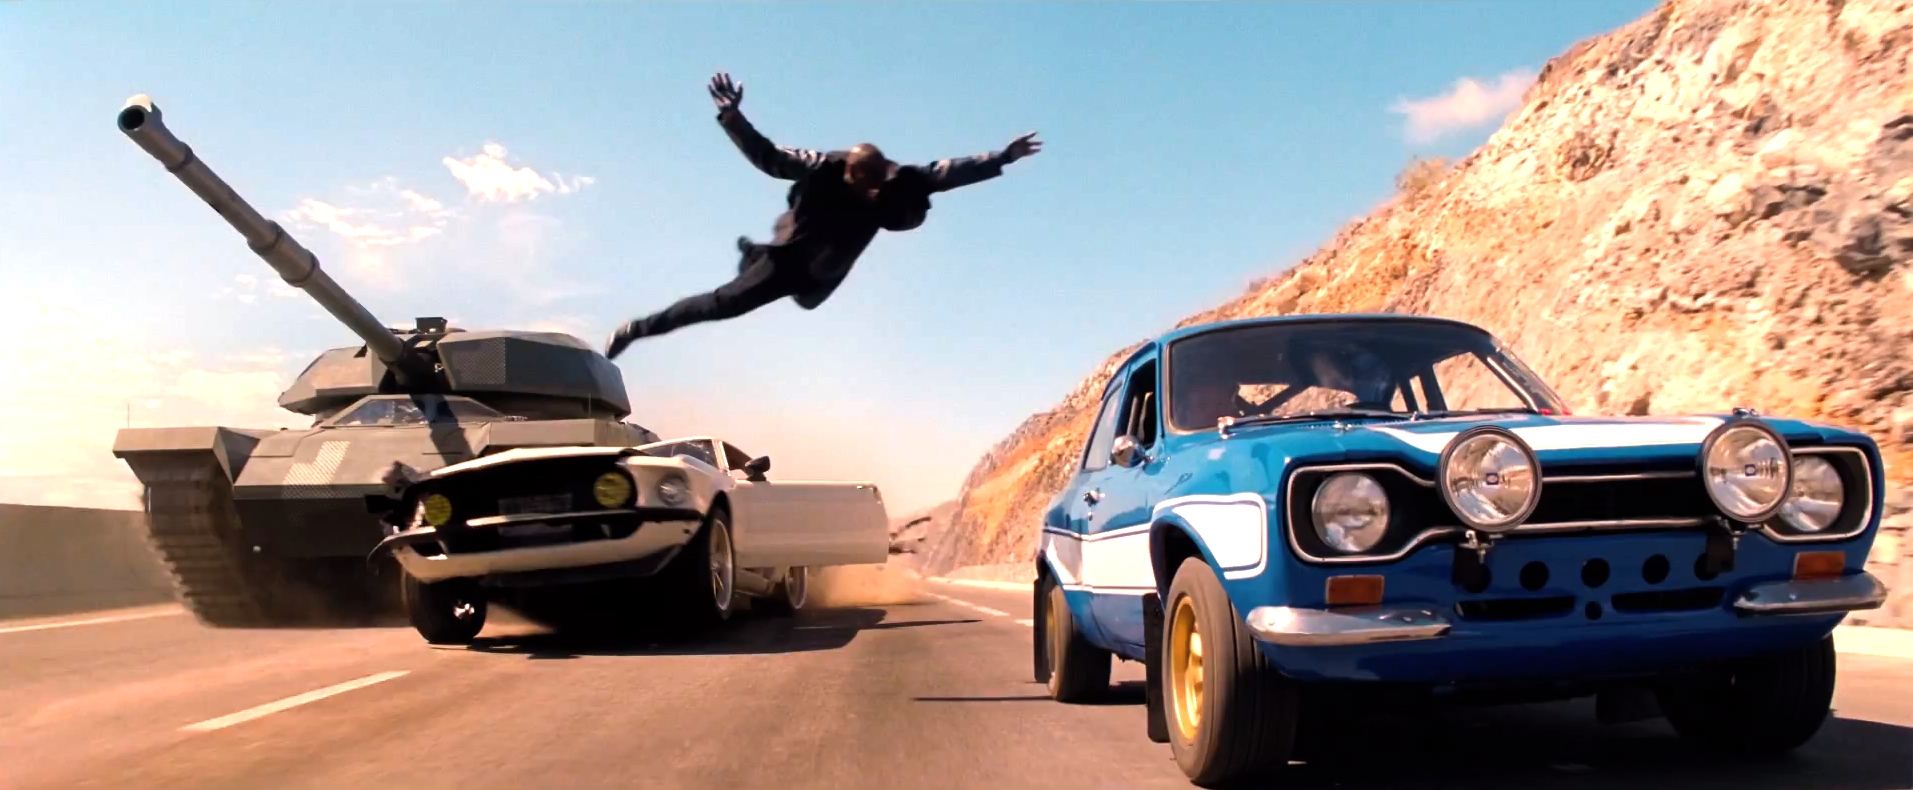 Free download Free download fast and furious 6 wallpapers hd fast and